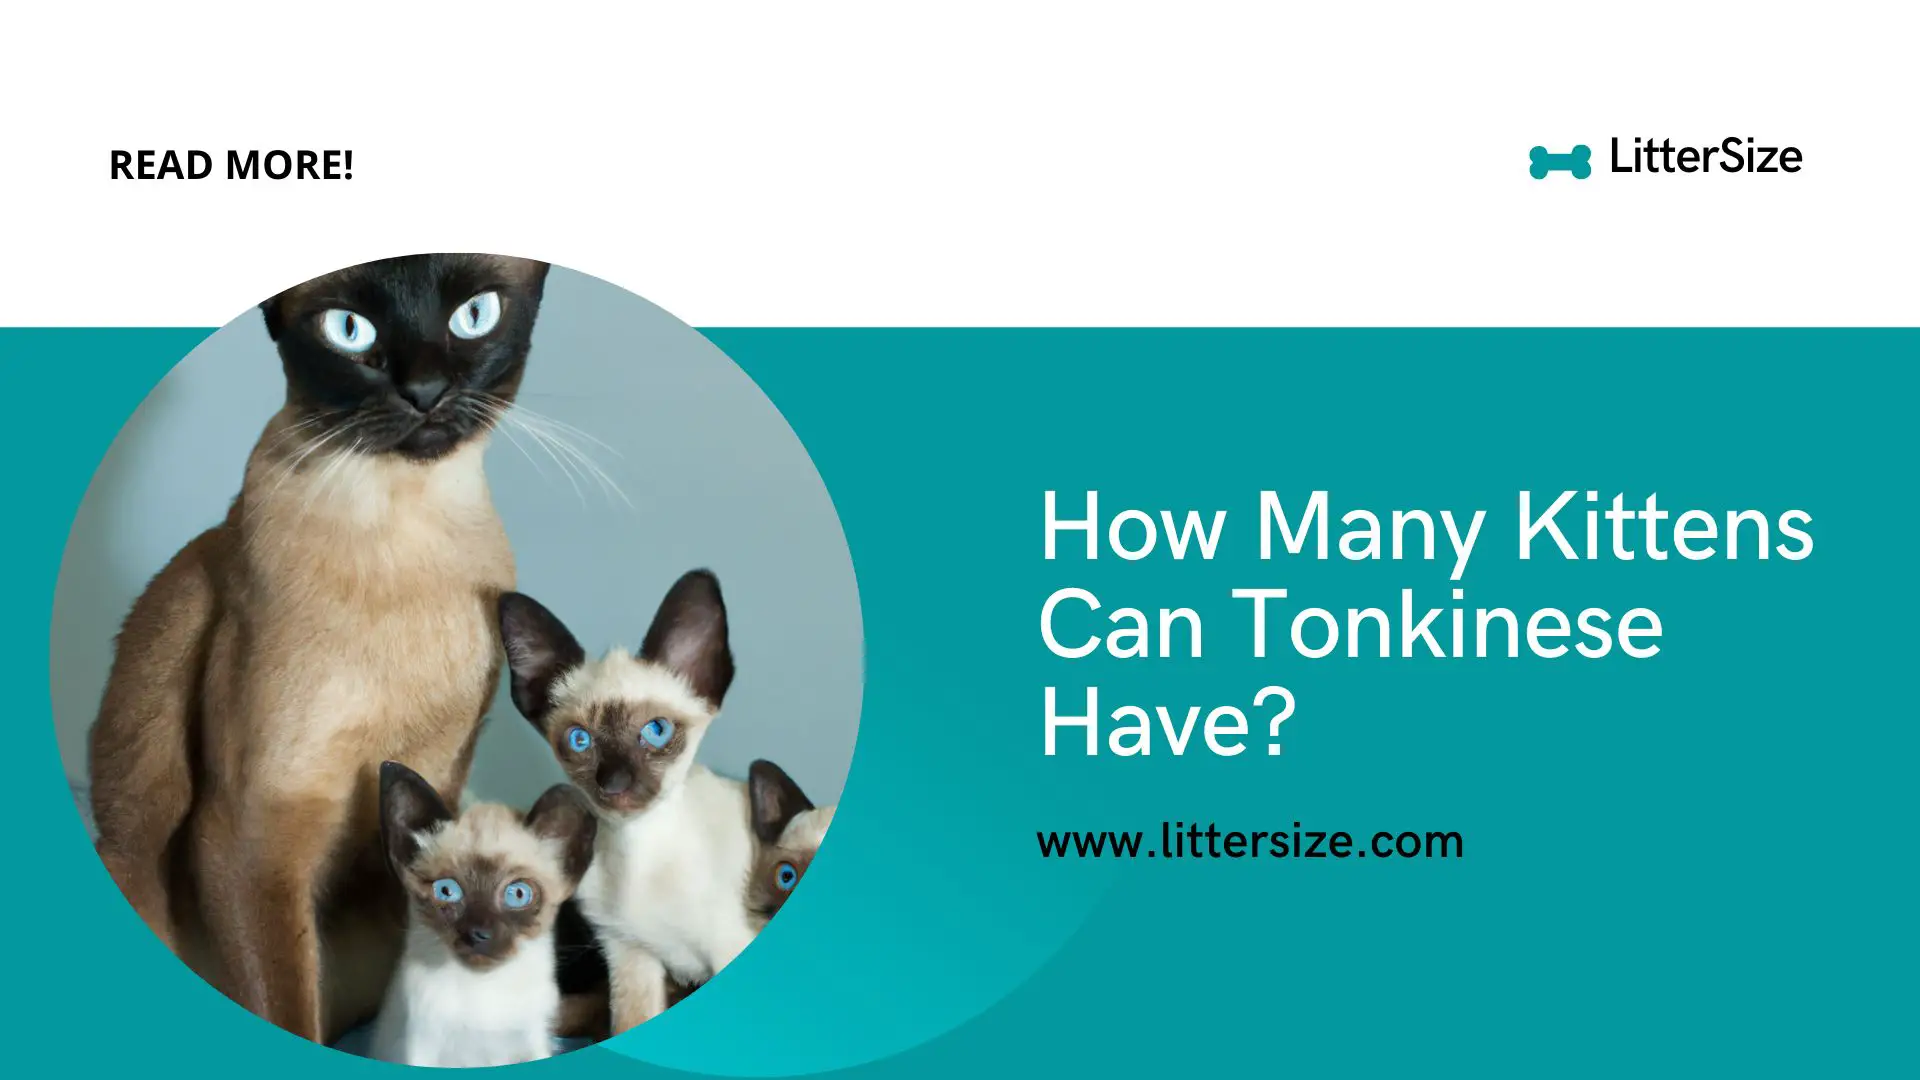 How Many Kittens Can Tonkinese Have?